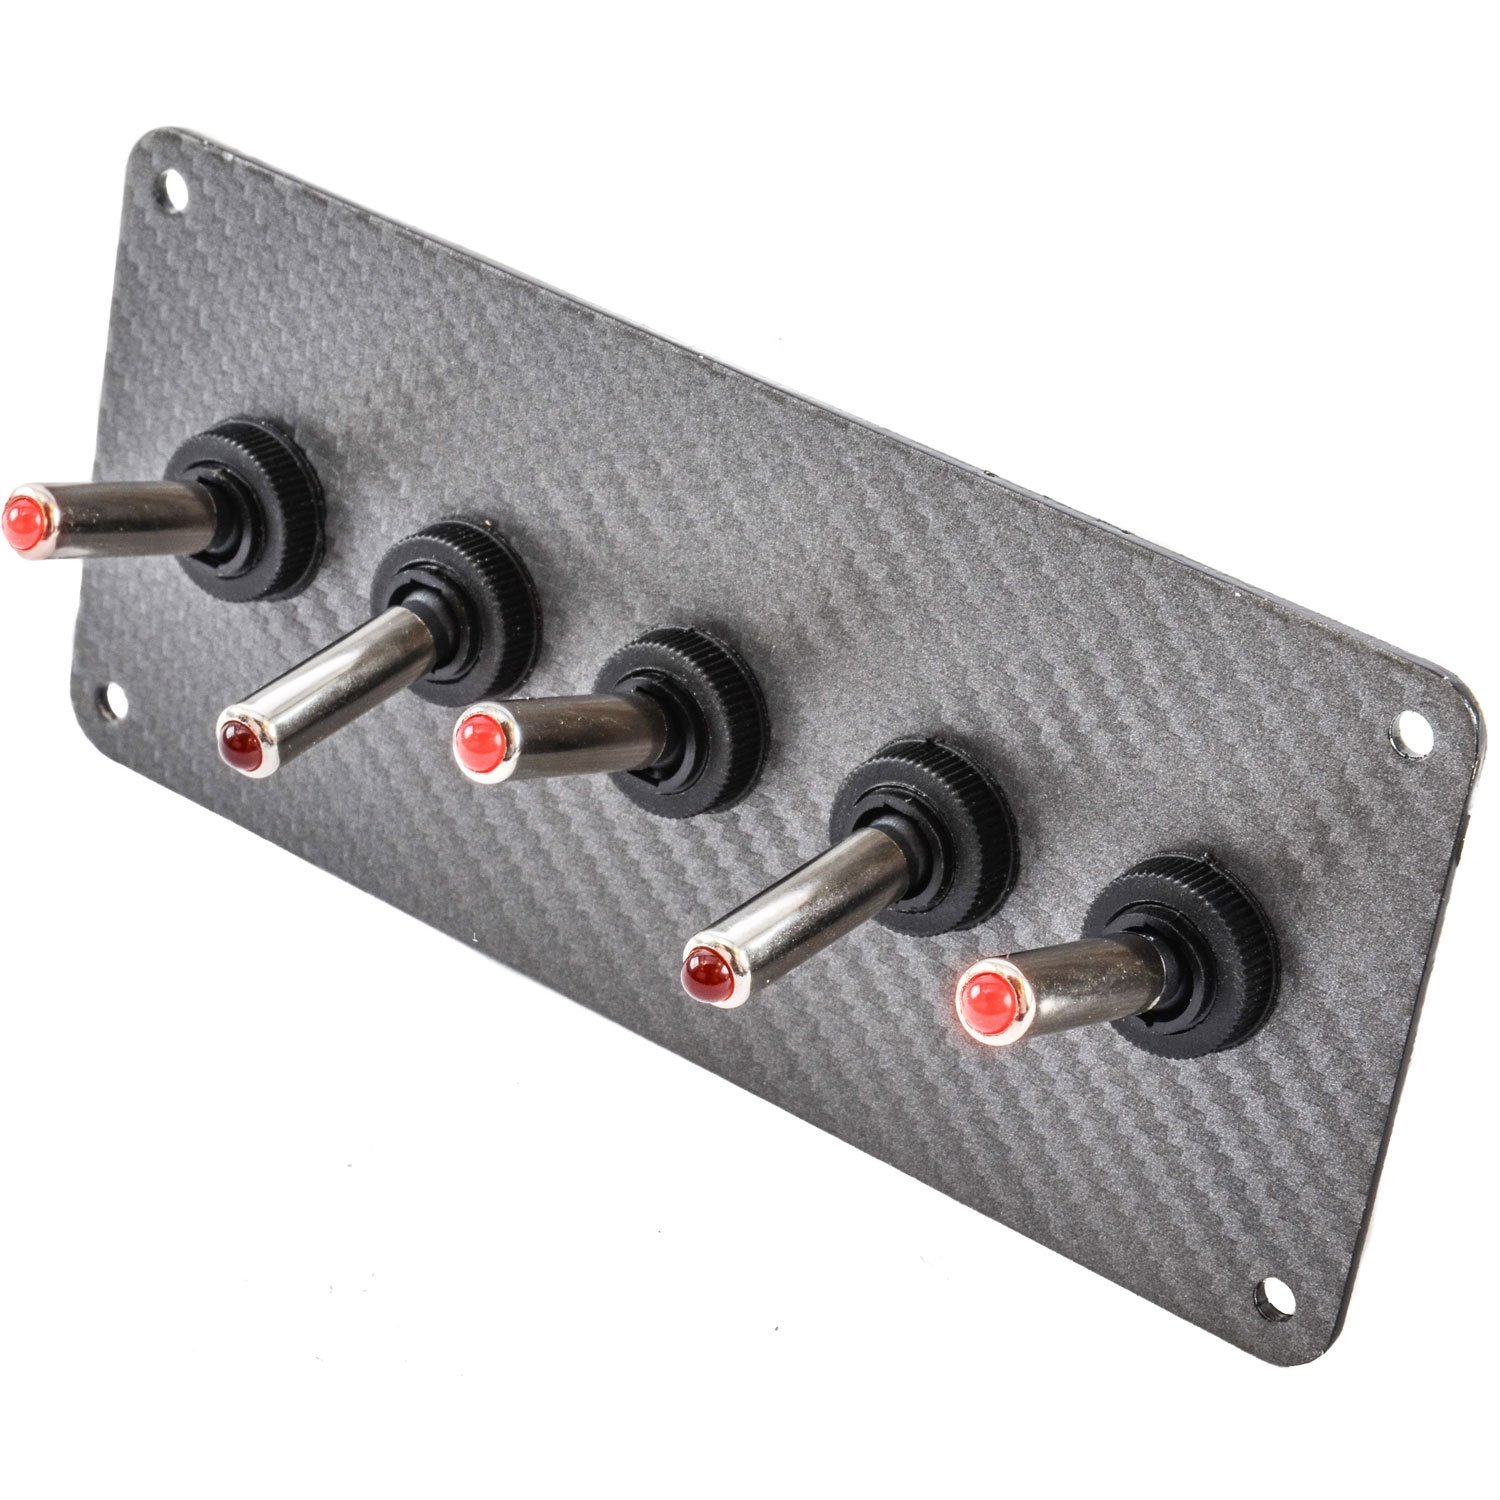 5-Toggle Panel with Switches Gray Carbon Fiber Vinyl Finish